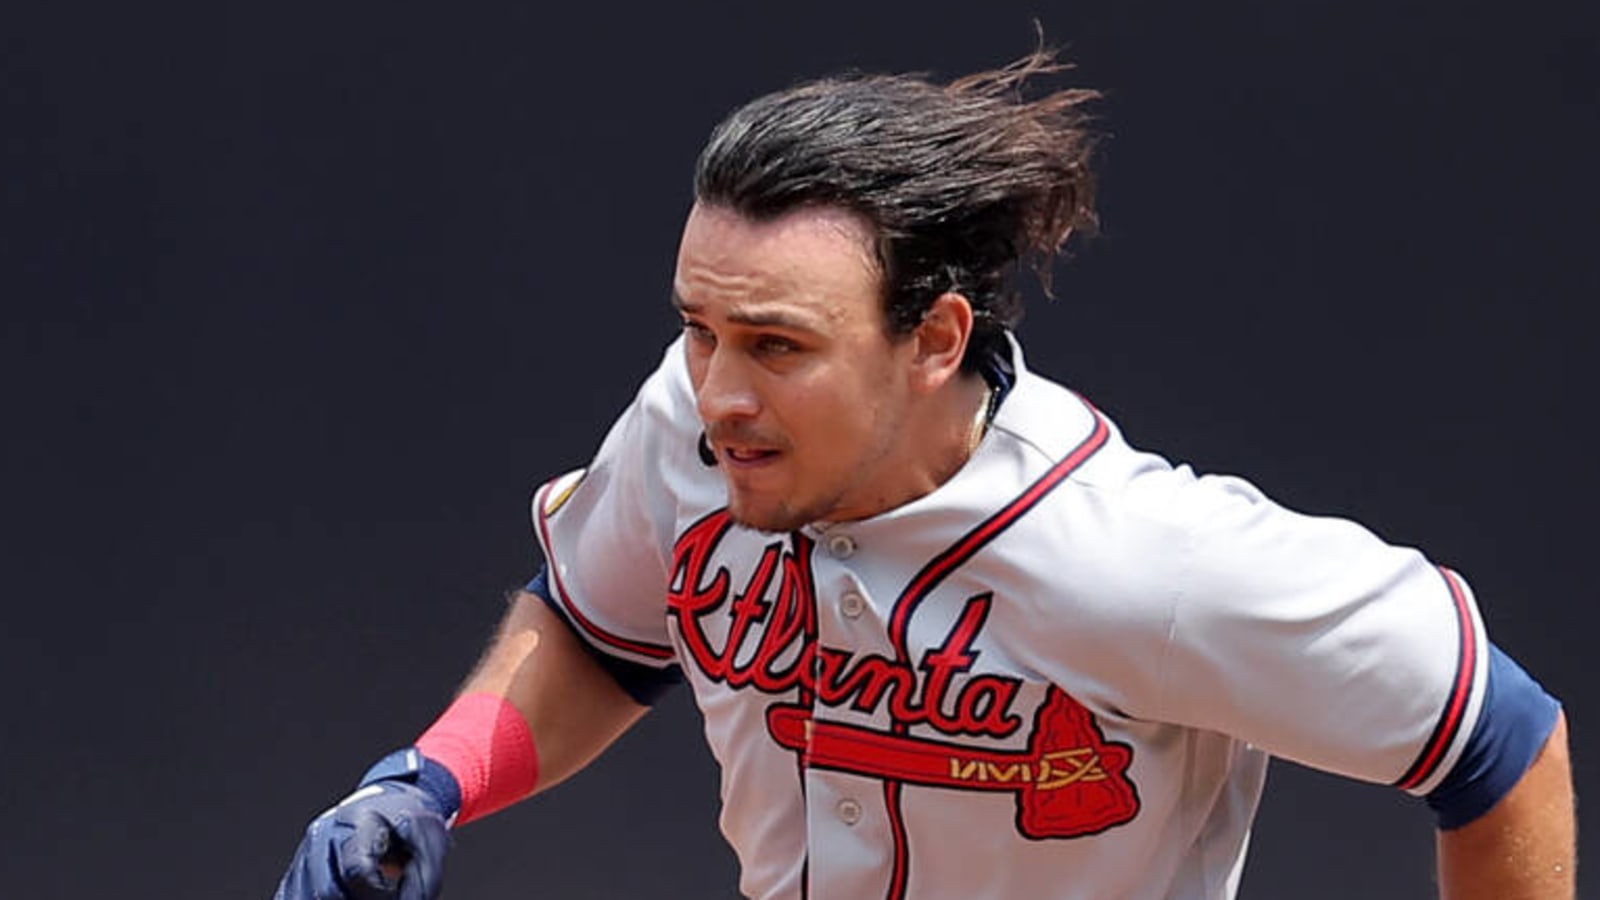 OptaSTATS on X: The @Braves' Nicky Lopez is the 1st player to